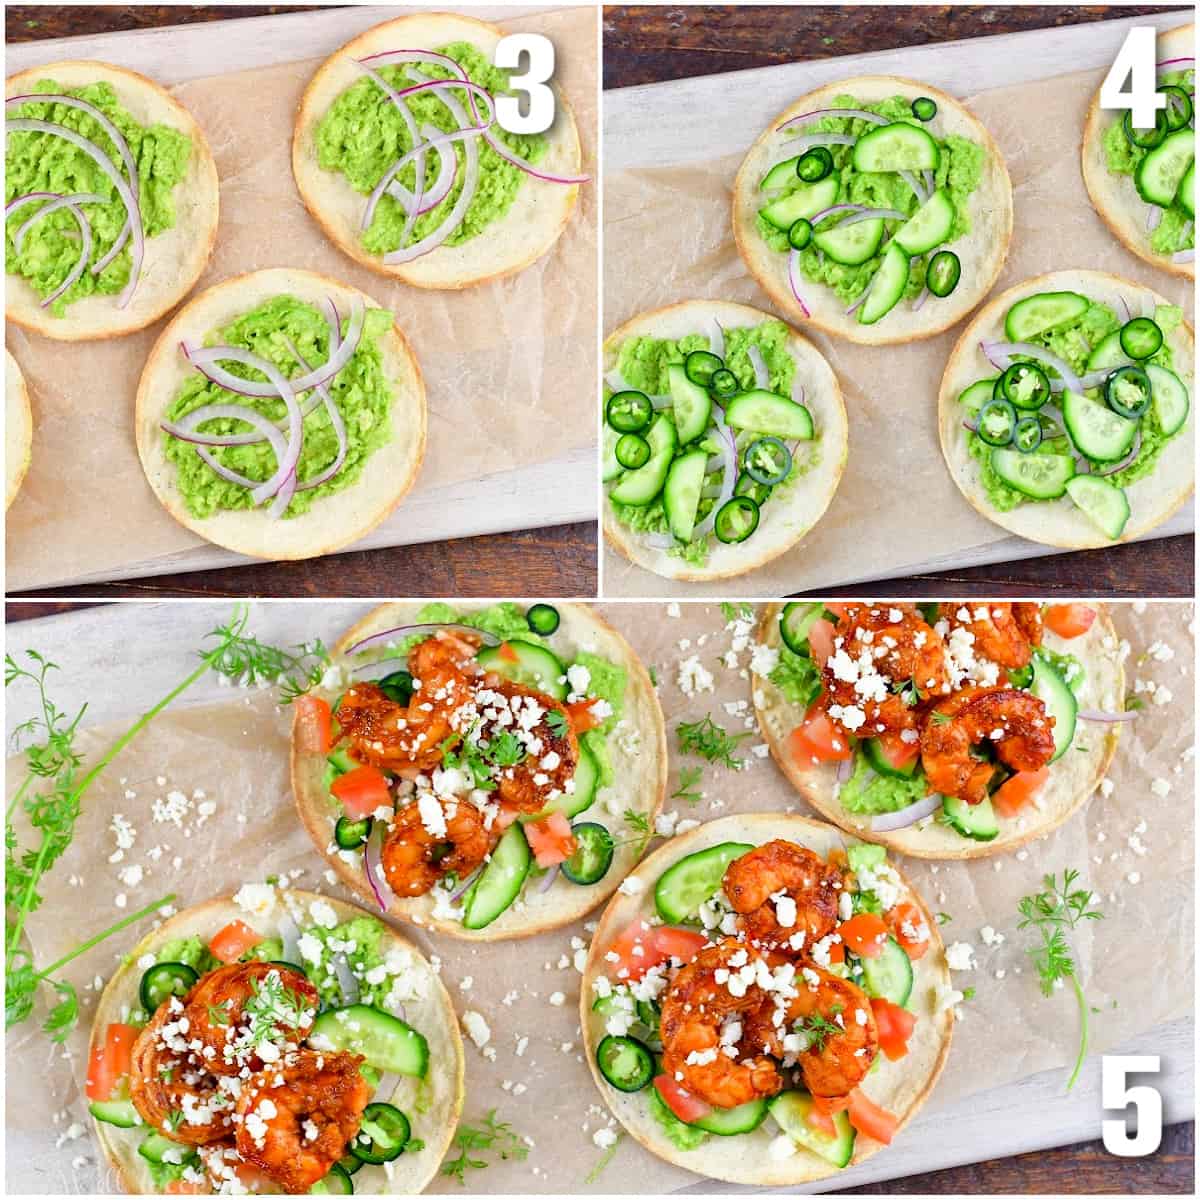 collage of three images of building shrimp tostadas with guacamole, veggies, and shrimp.